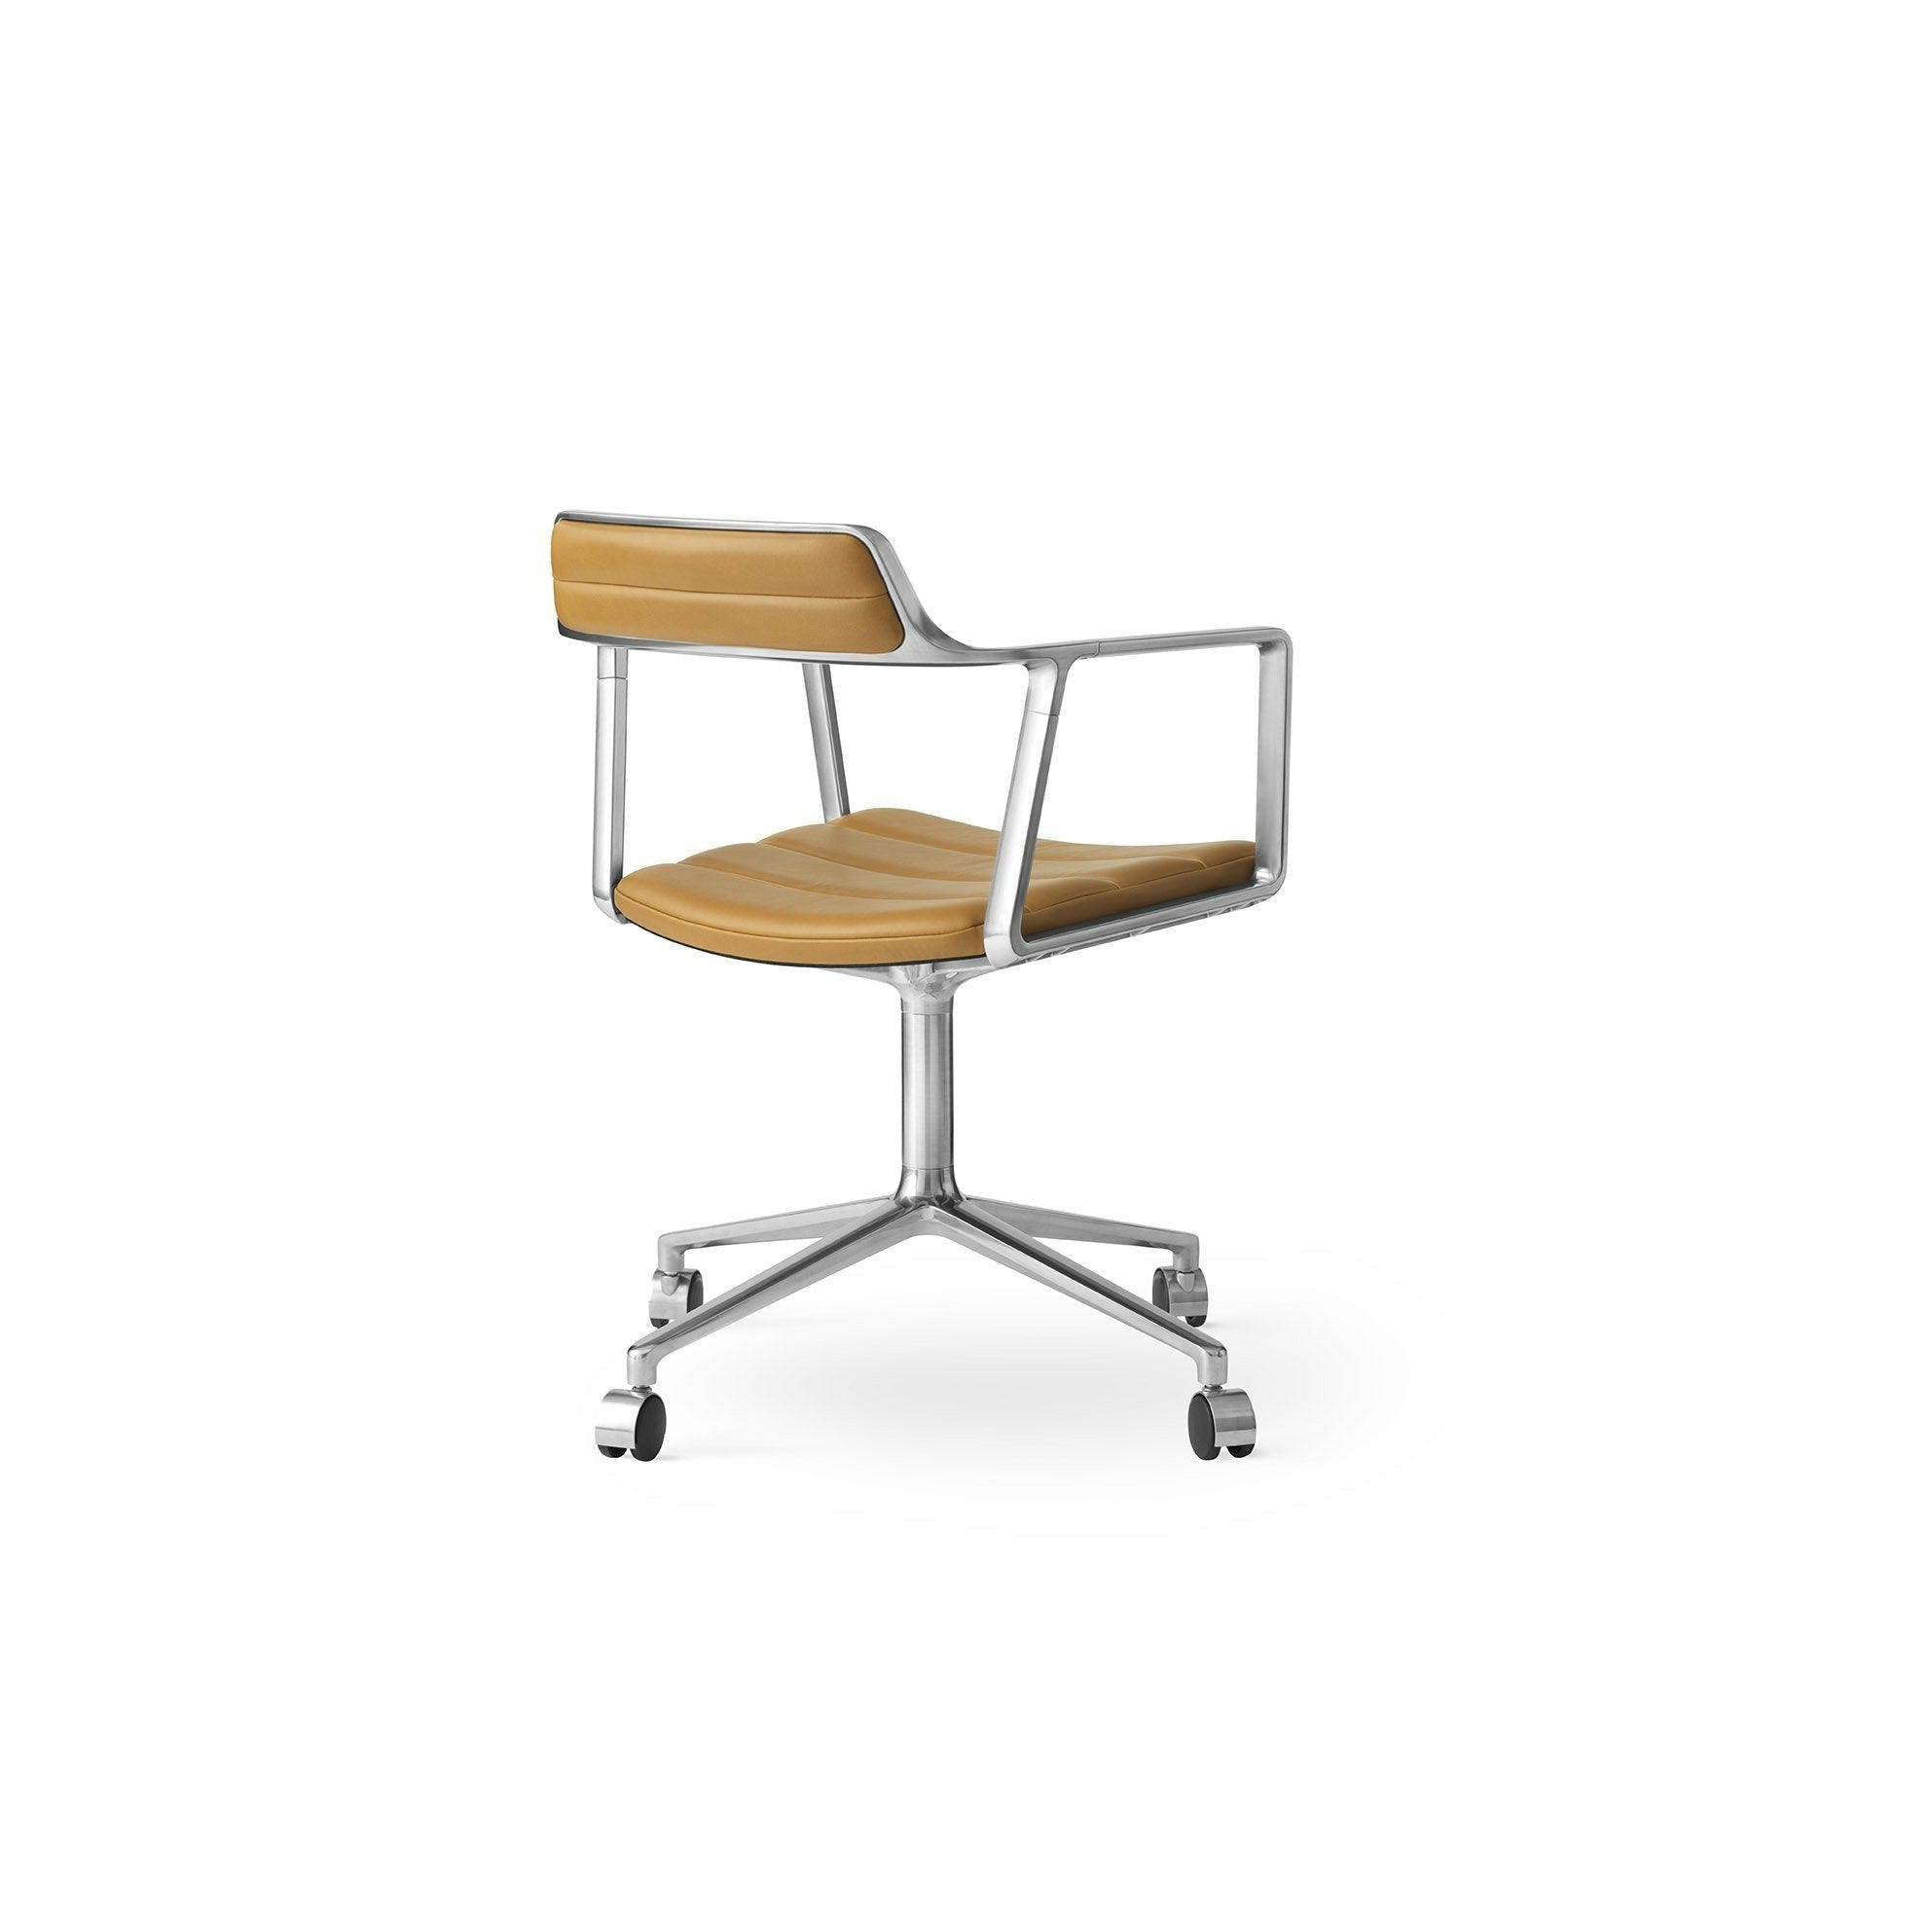 Vipp 452 Swivel Chair With Castors, Brown